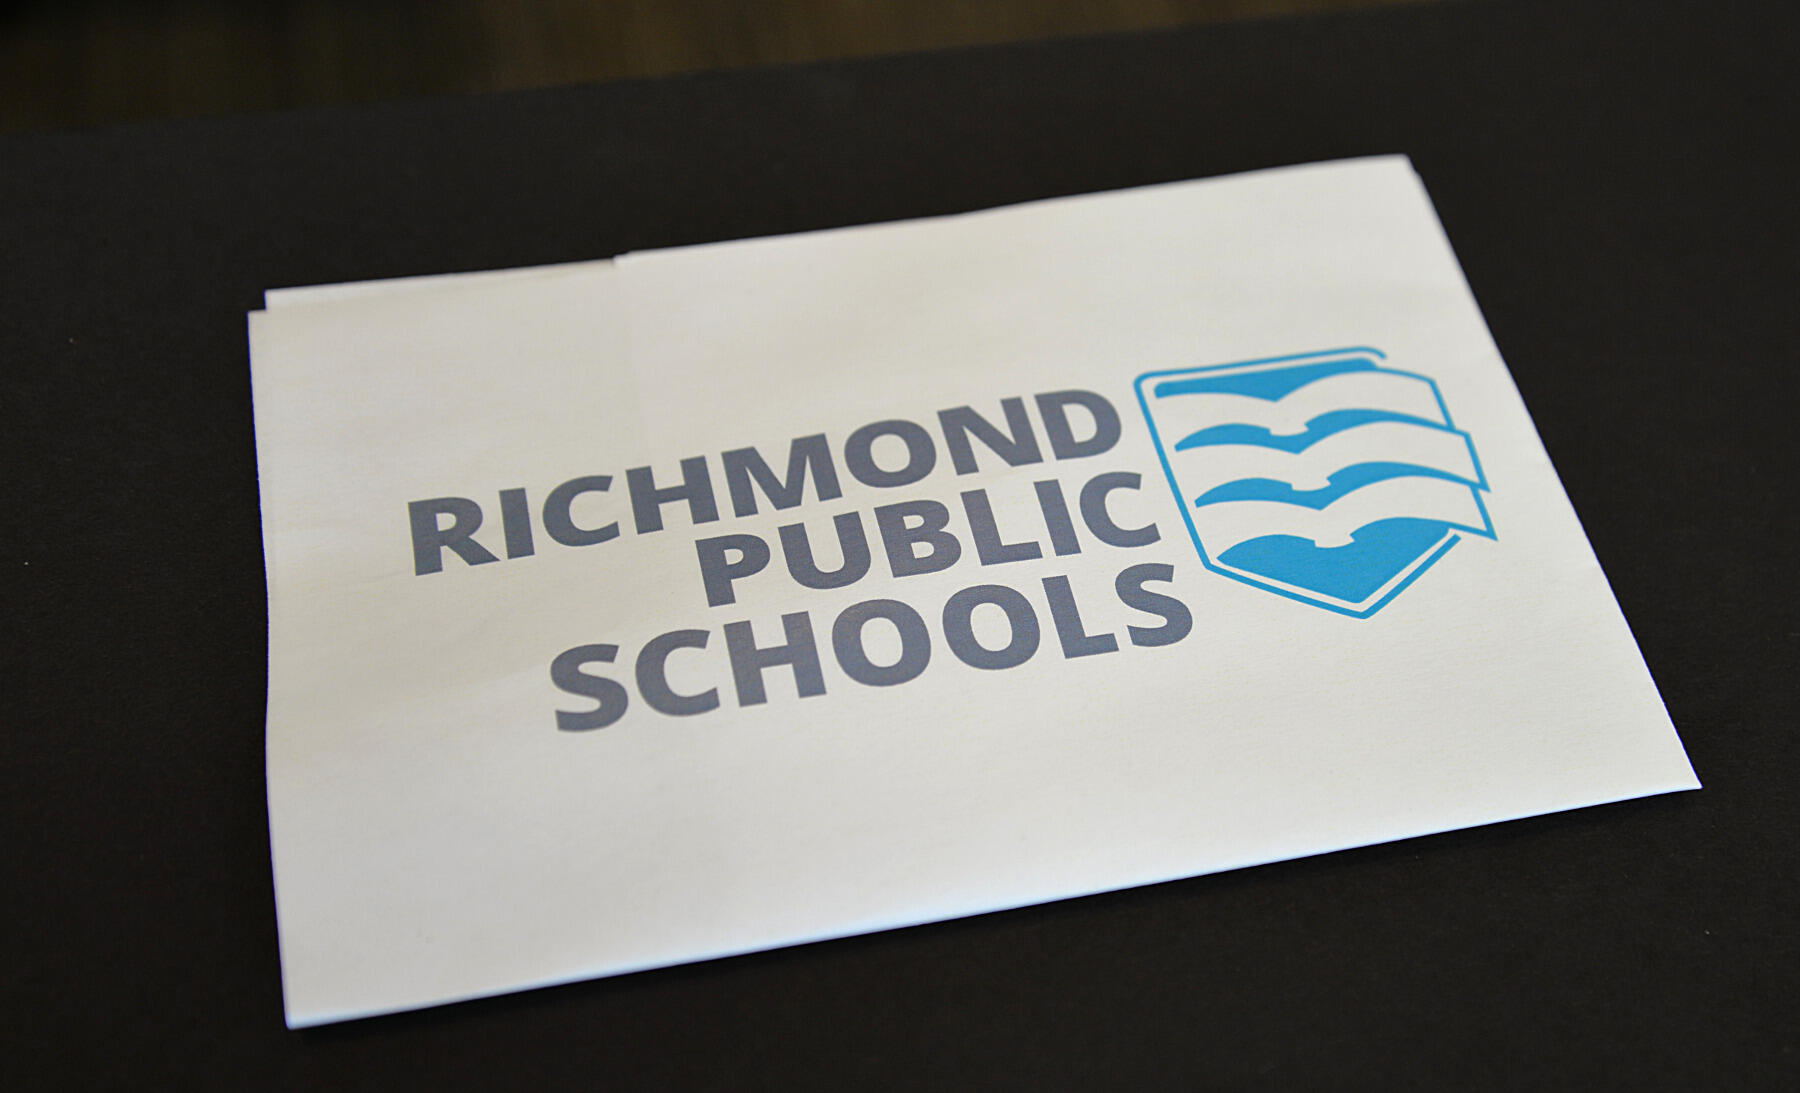 The proposed new logo for Richmond Public Schools is meant to evoke books, the James River, birds and bridges, according to designer Bridget Guckin, a senior creative advertising major.